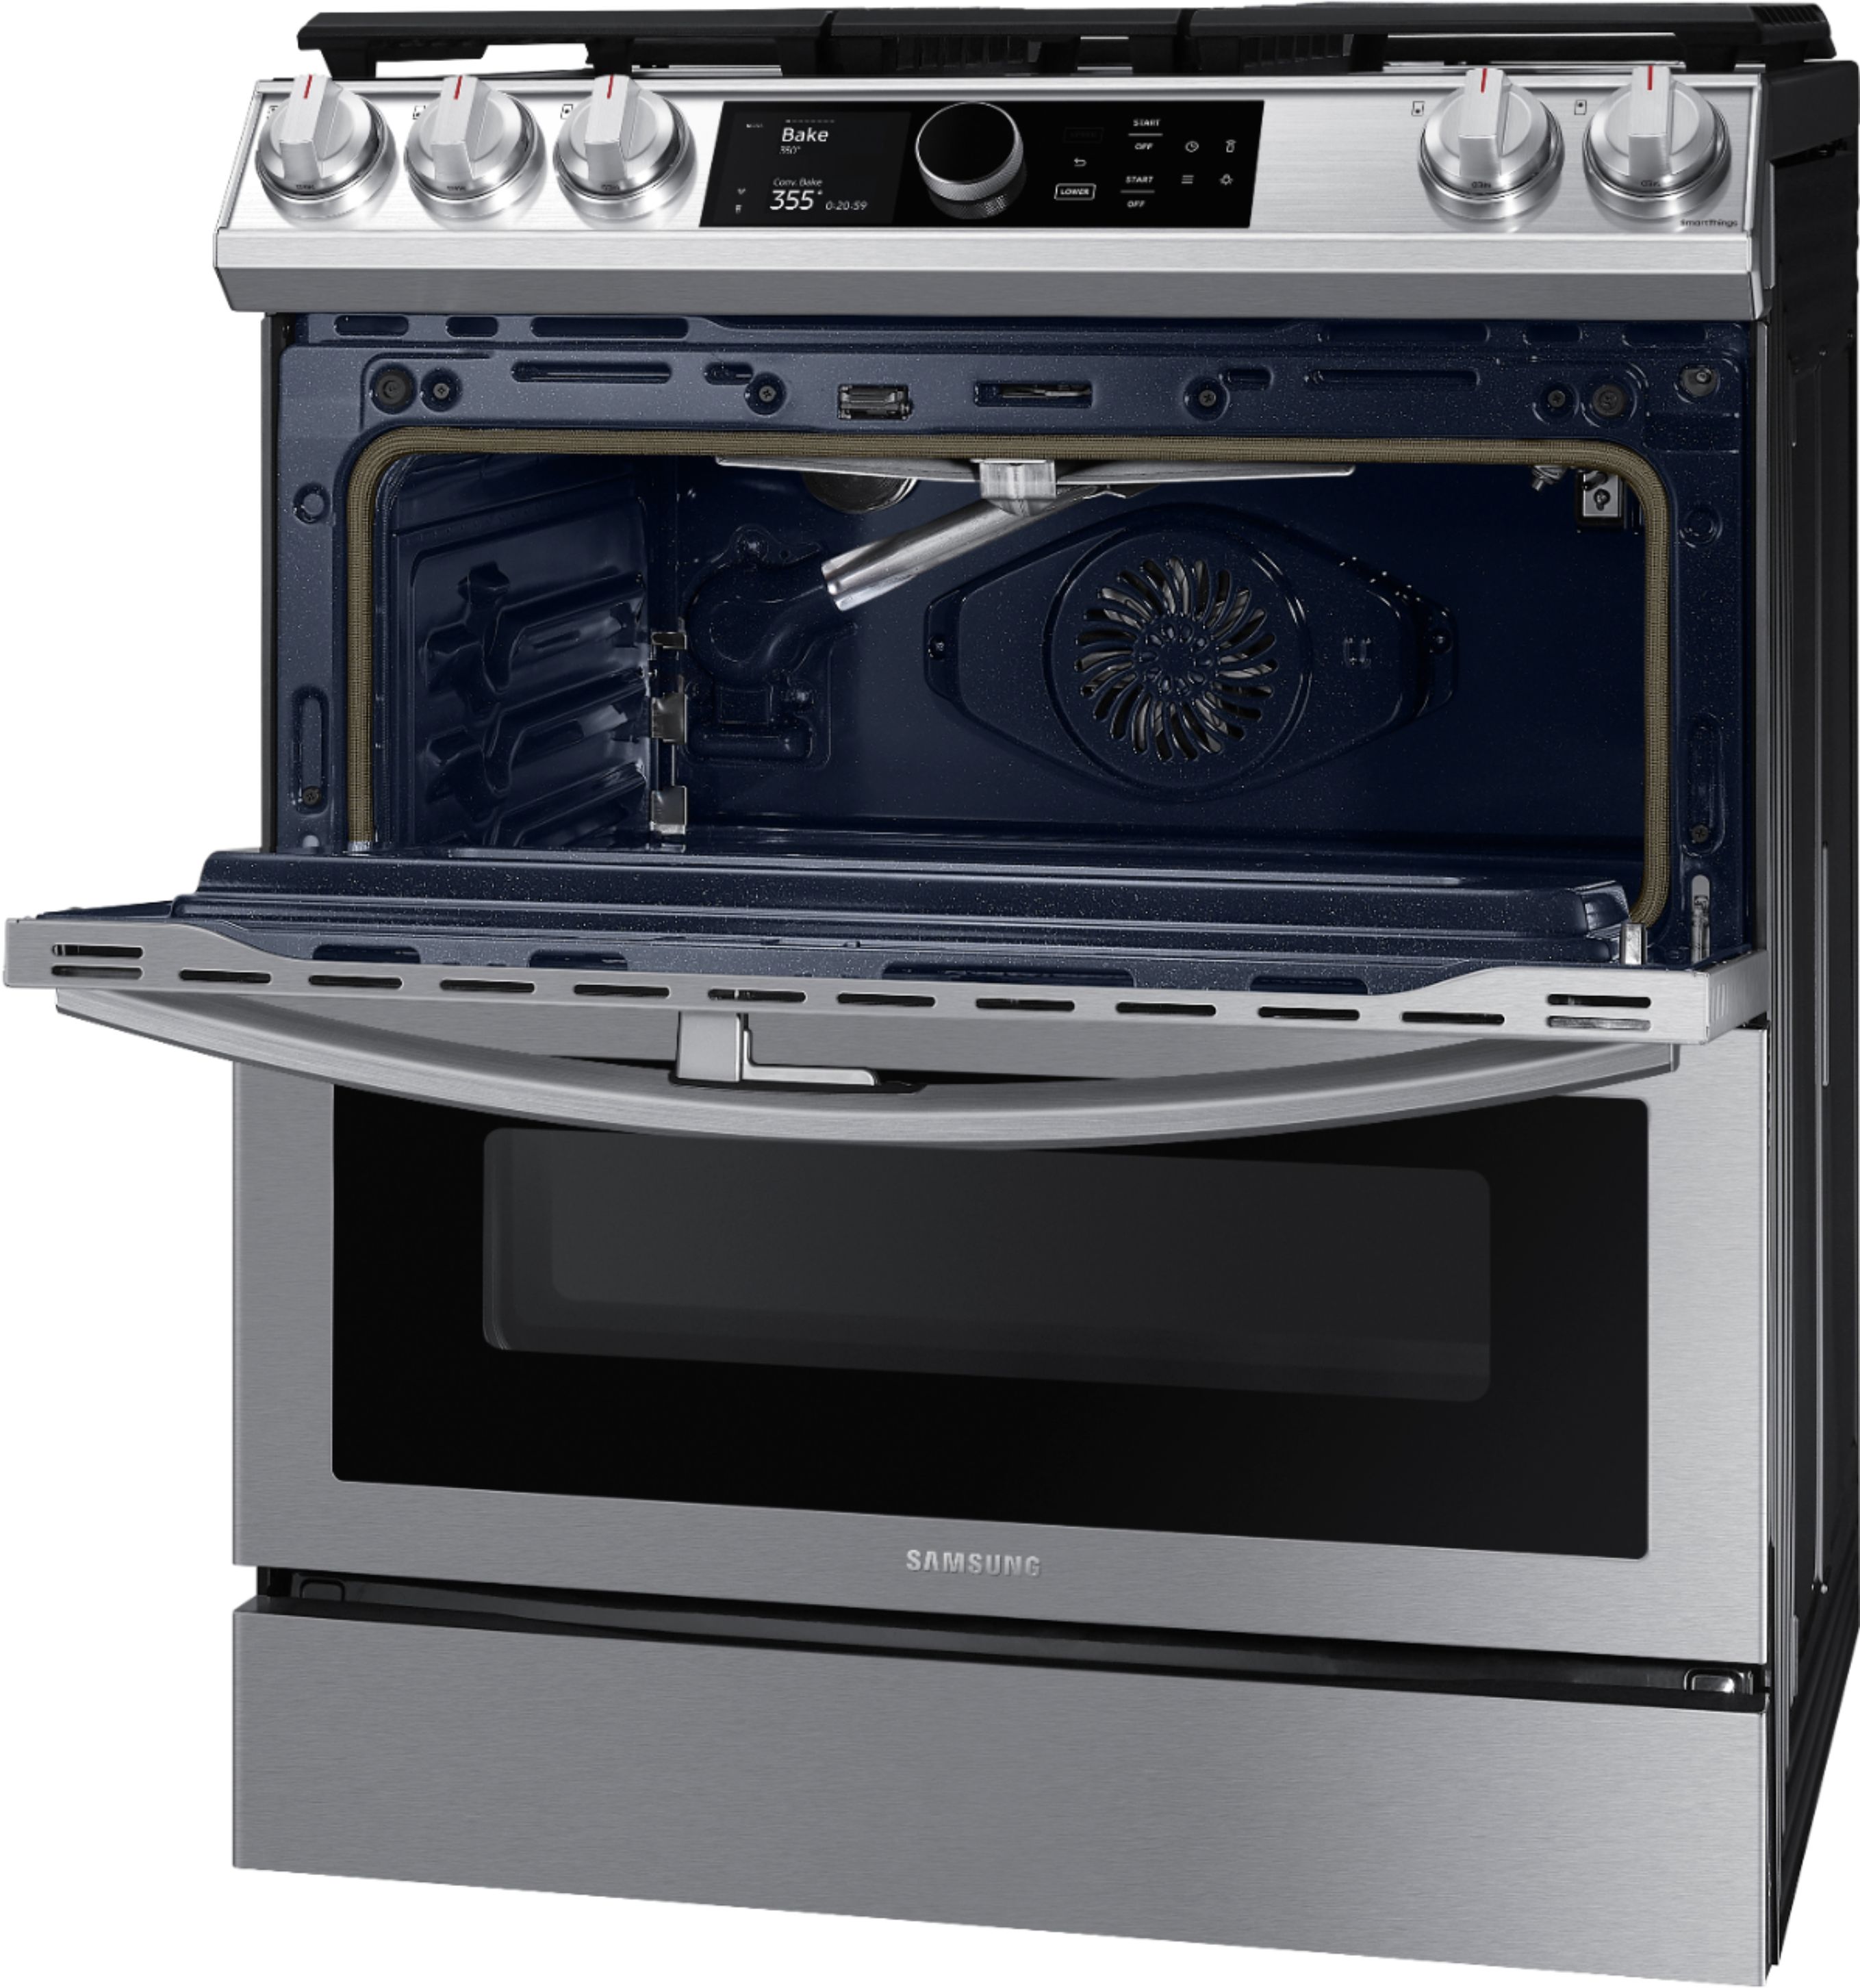 Samsung 6.0 Cu. ft. Smart GAS Range with Air Fry, Convection+ & Cooktop - Stainless Steel